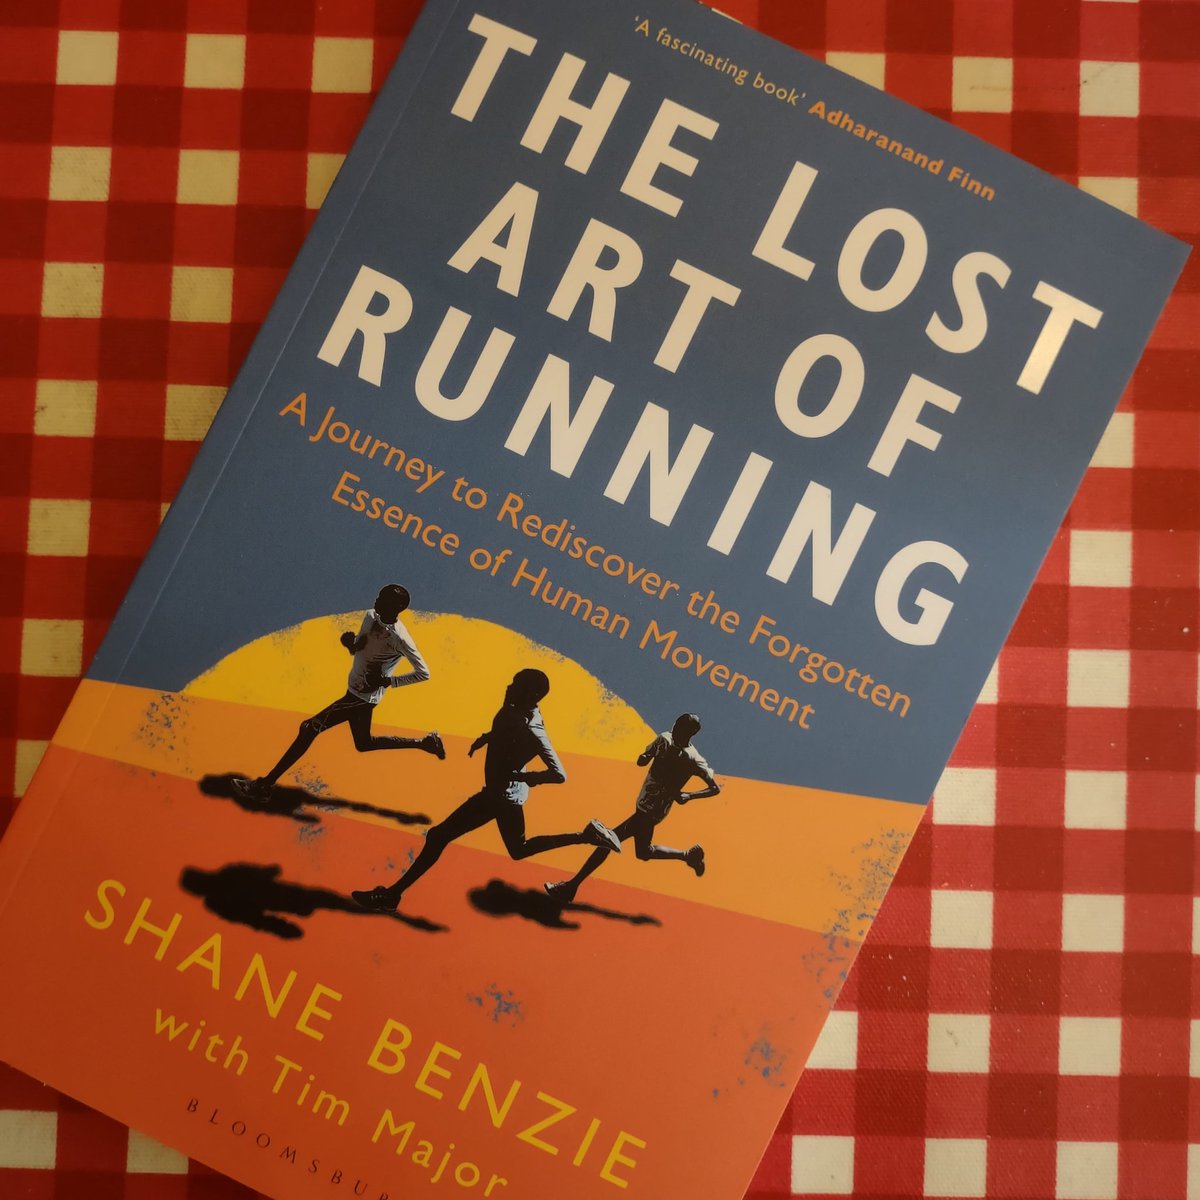 This week's reading.

Lost art of running

#lostartofrunning #running #artofrunning #biomechanics #runnersofinstagram